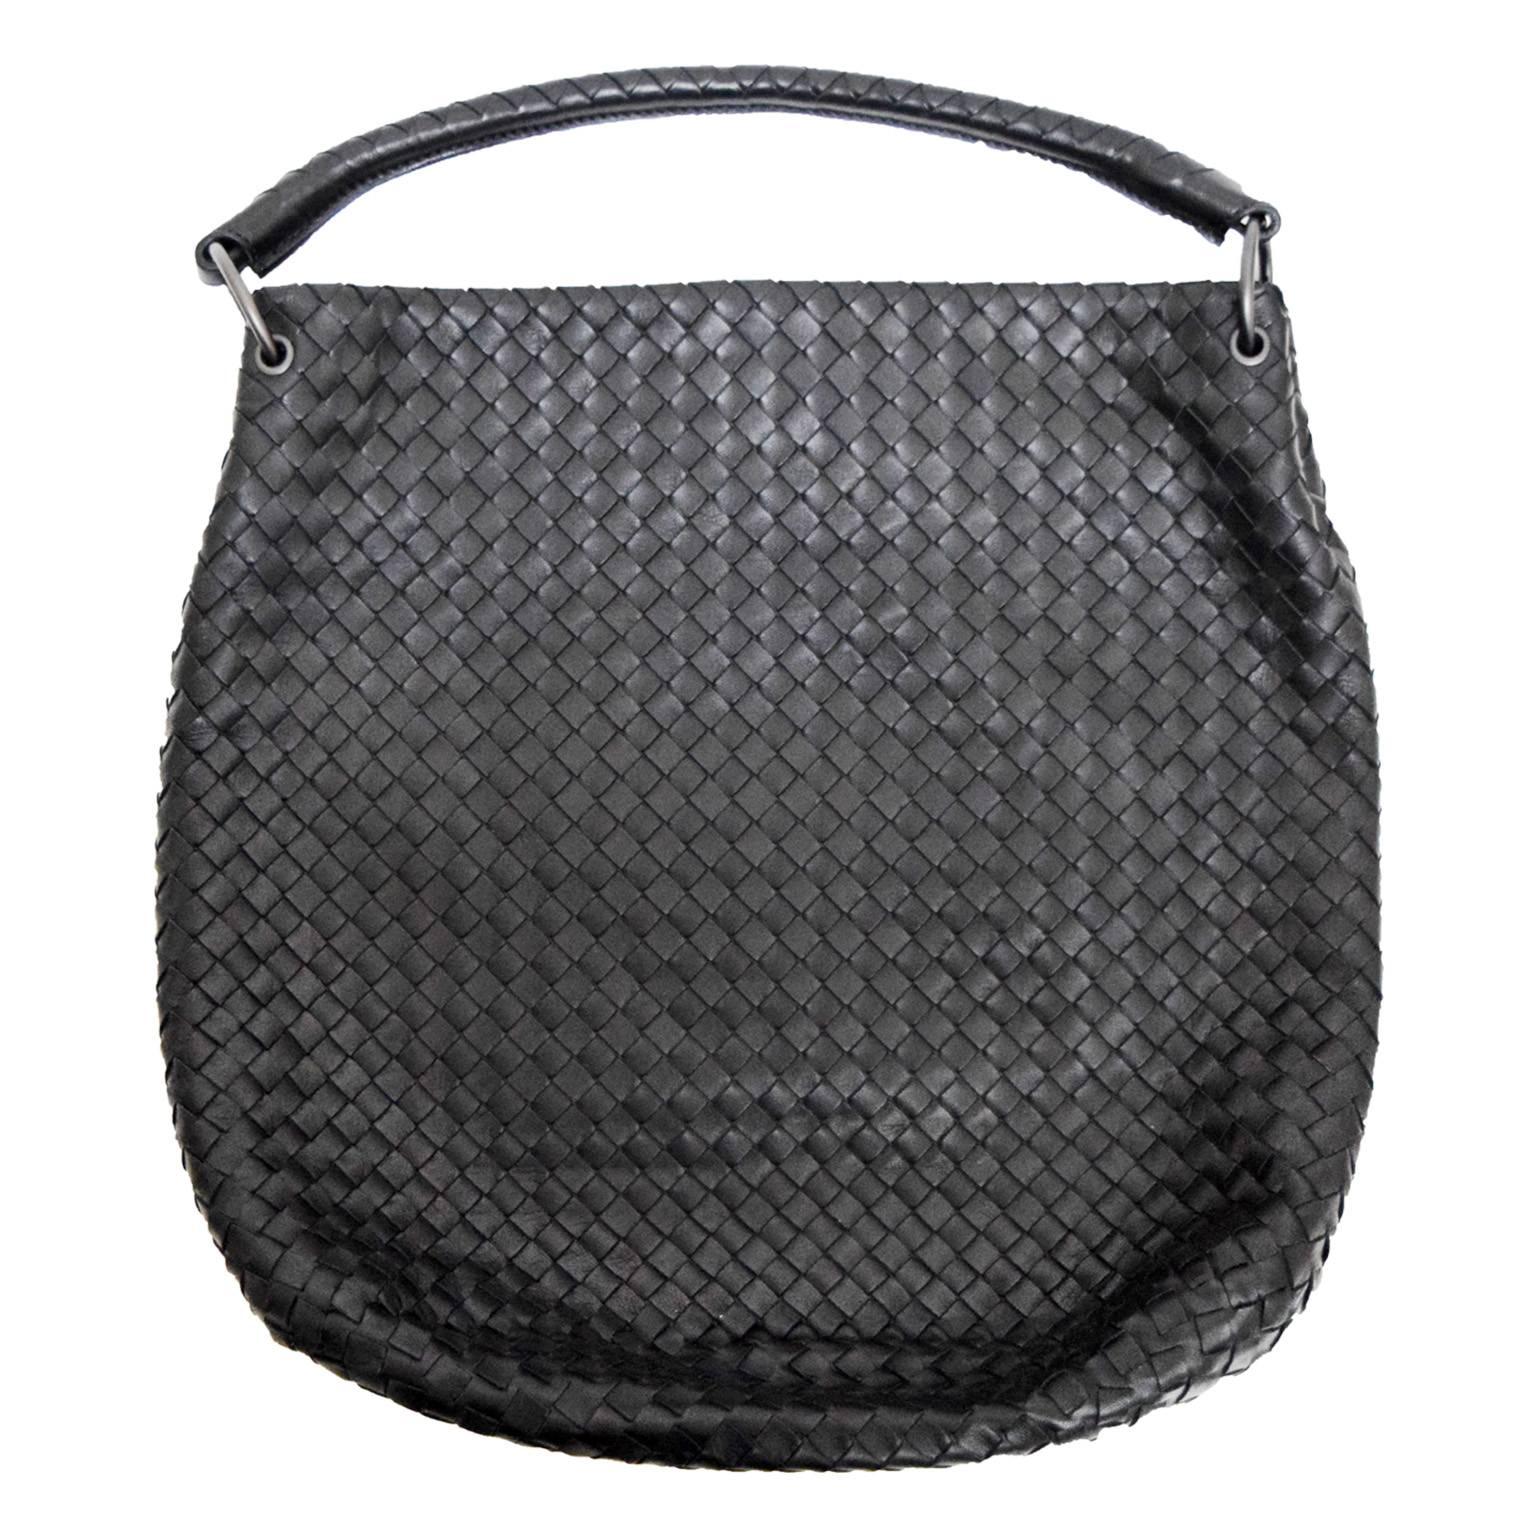 This amazing Bottega Veneta shoulder bag is in excellent condition. The exterior features stunning woven black leather with a unique pleated pattern along the center front and back sides. The top magnetic snap closure opens to a beige suede lined